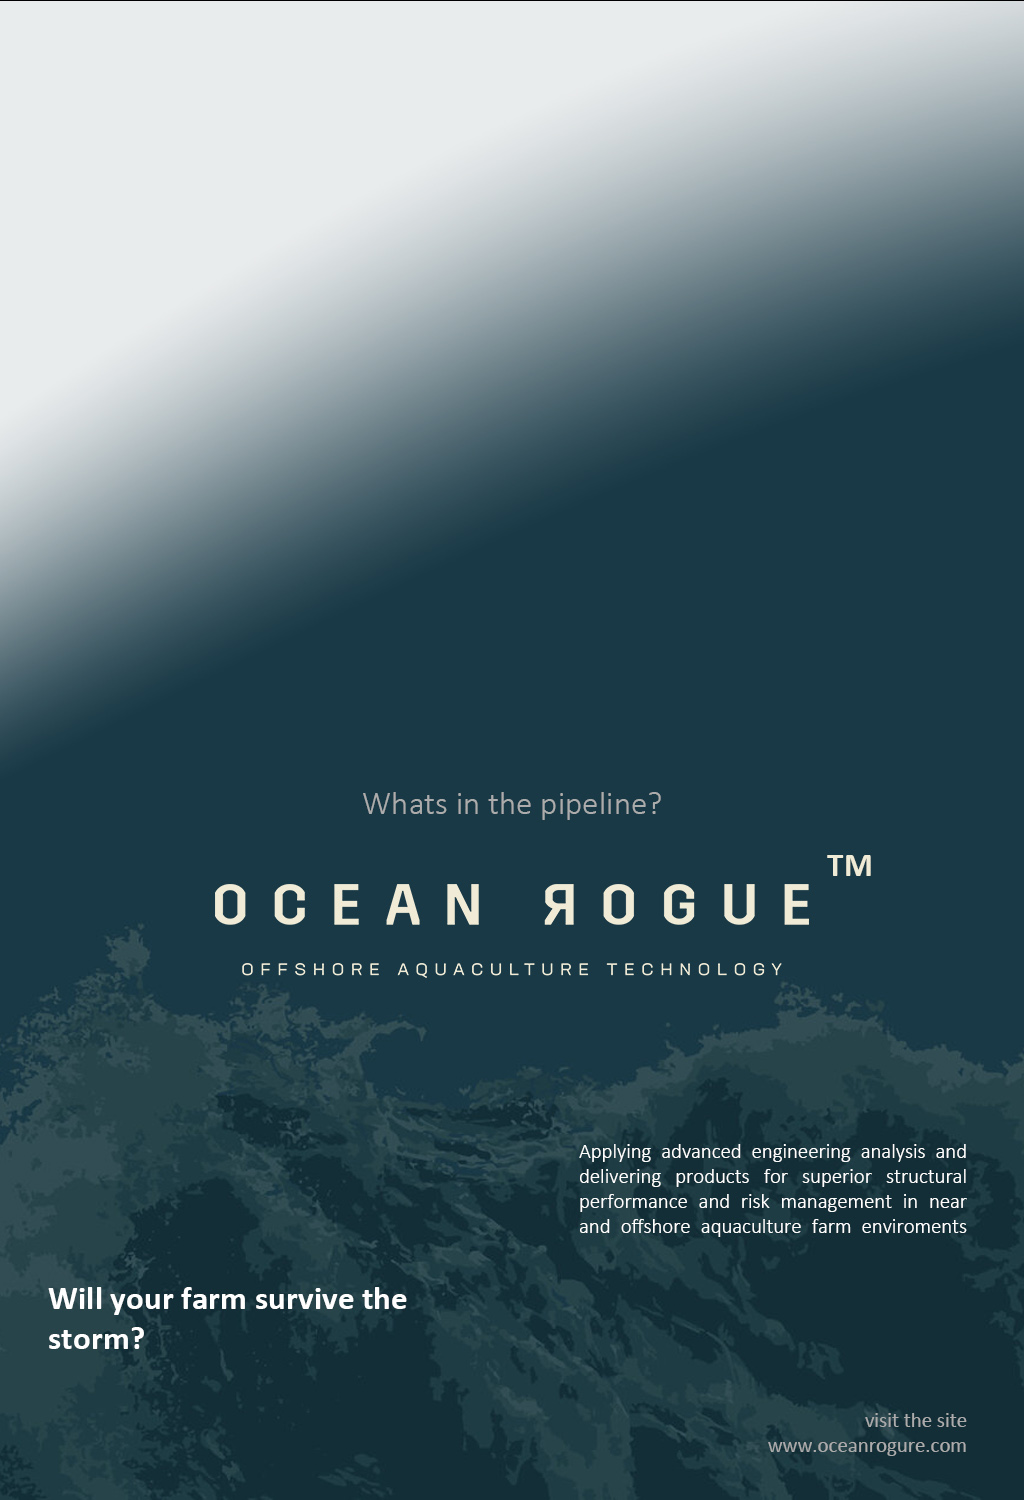 Applying advanced engineering analysis and delivering products for superior structural performance and risk management in near and offshore aquaculture farm enviroments - www.oceanrogure.com